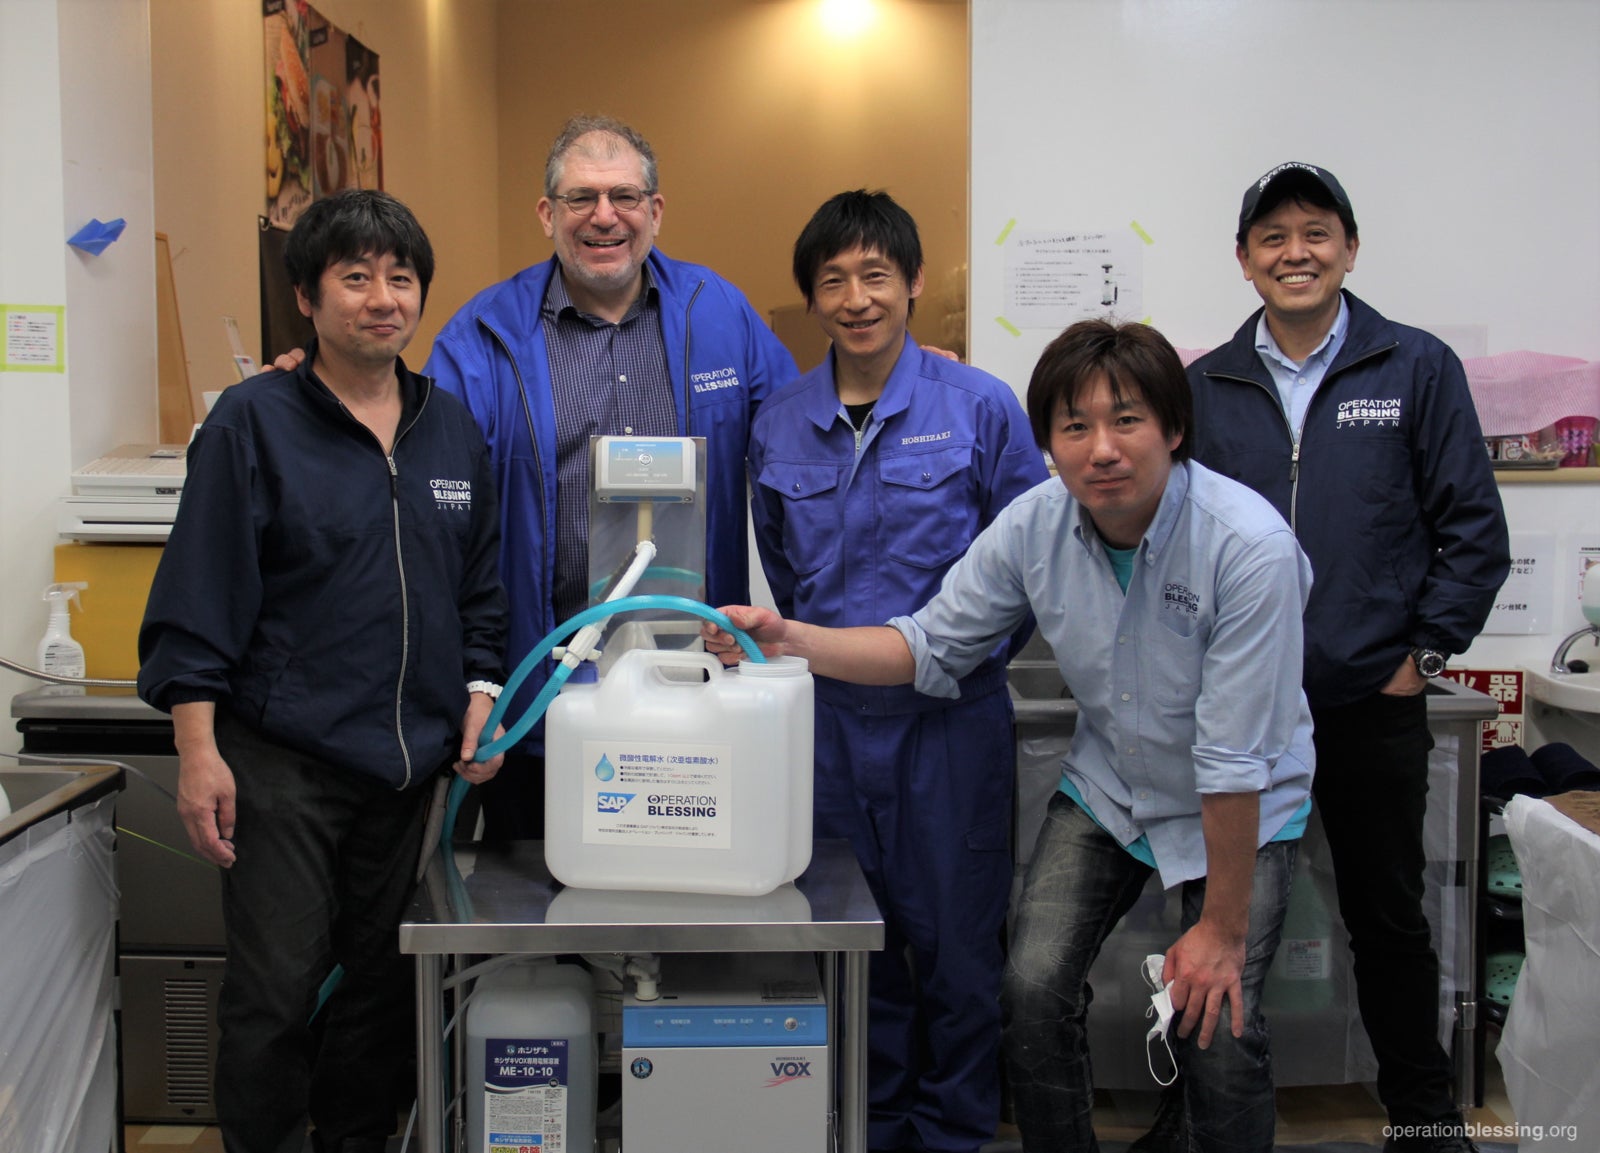 The team at Operation Blessing Japan working to bless the vulnerable during the coronavirus crisis.